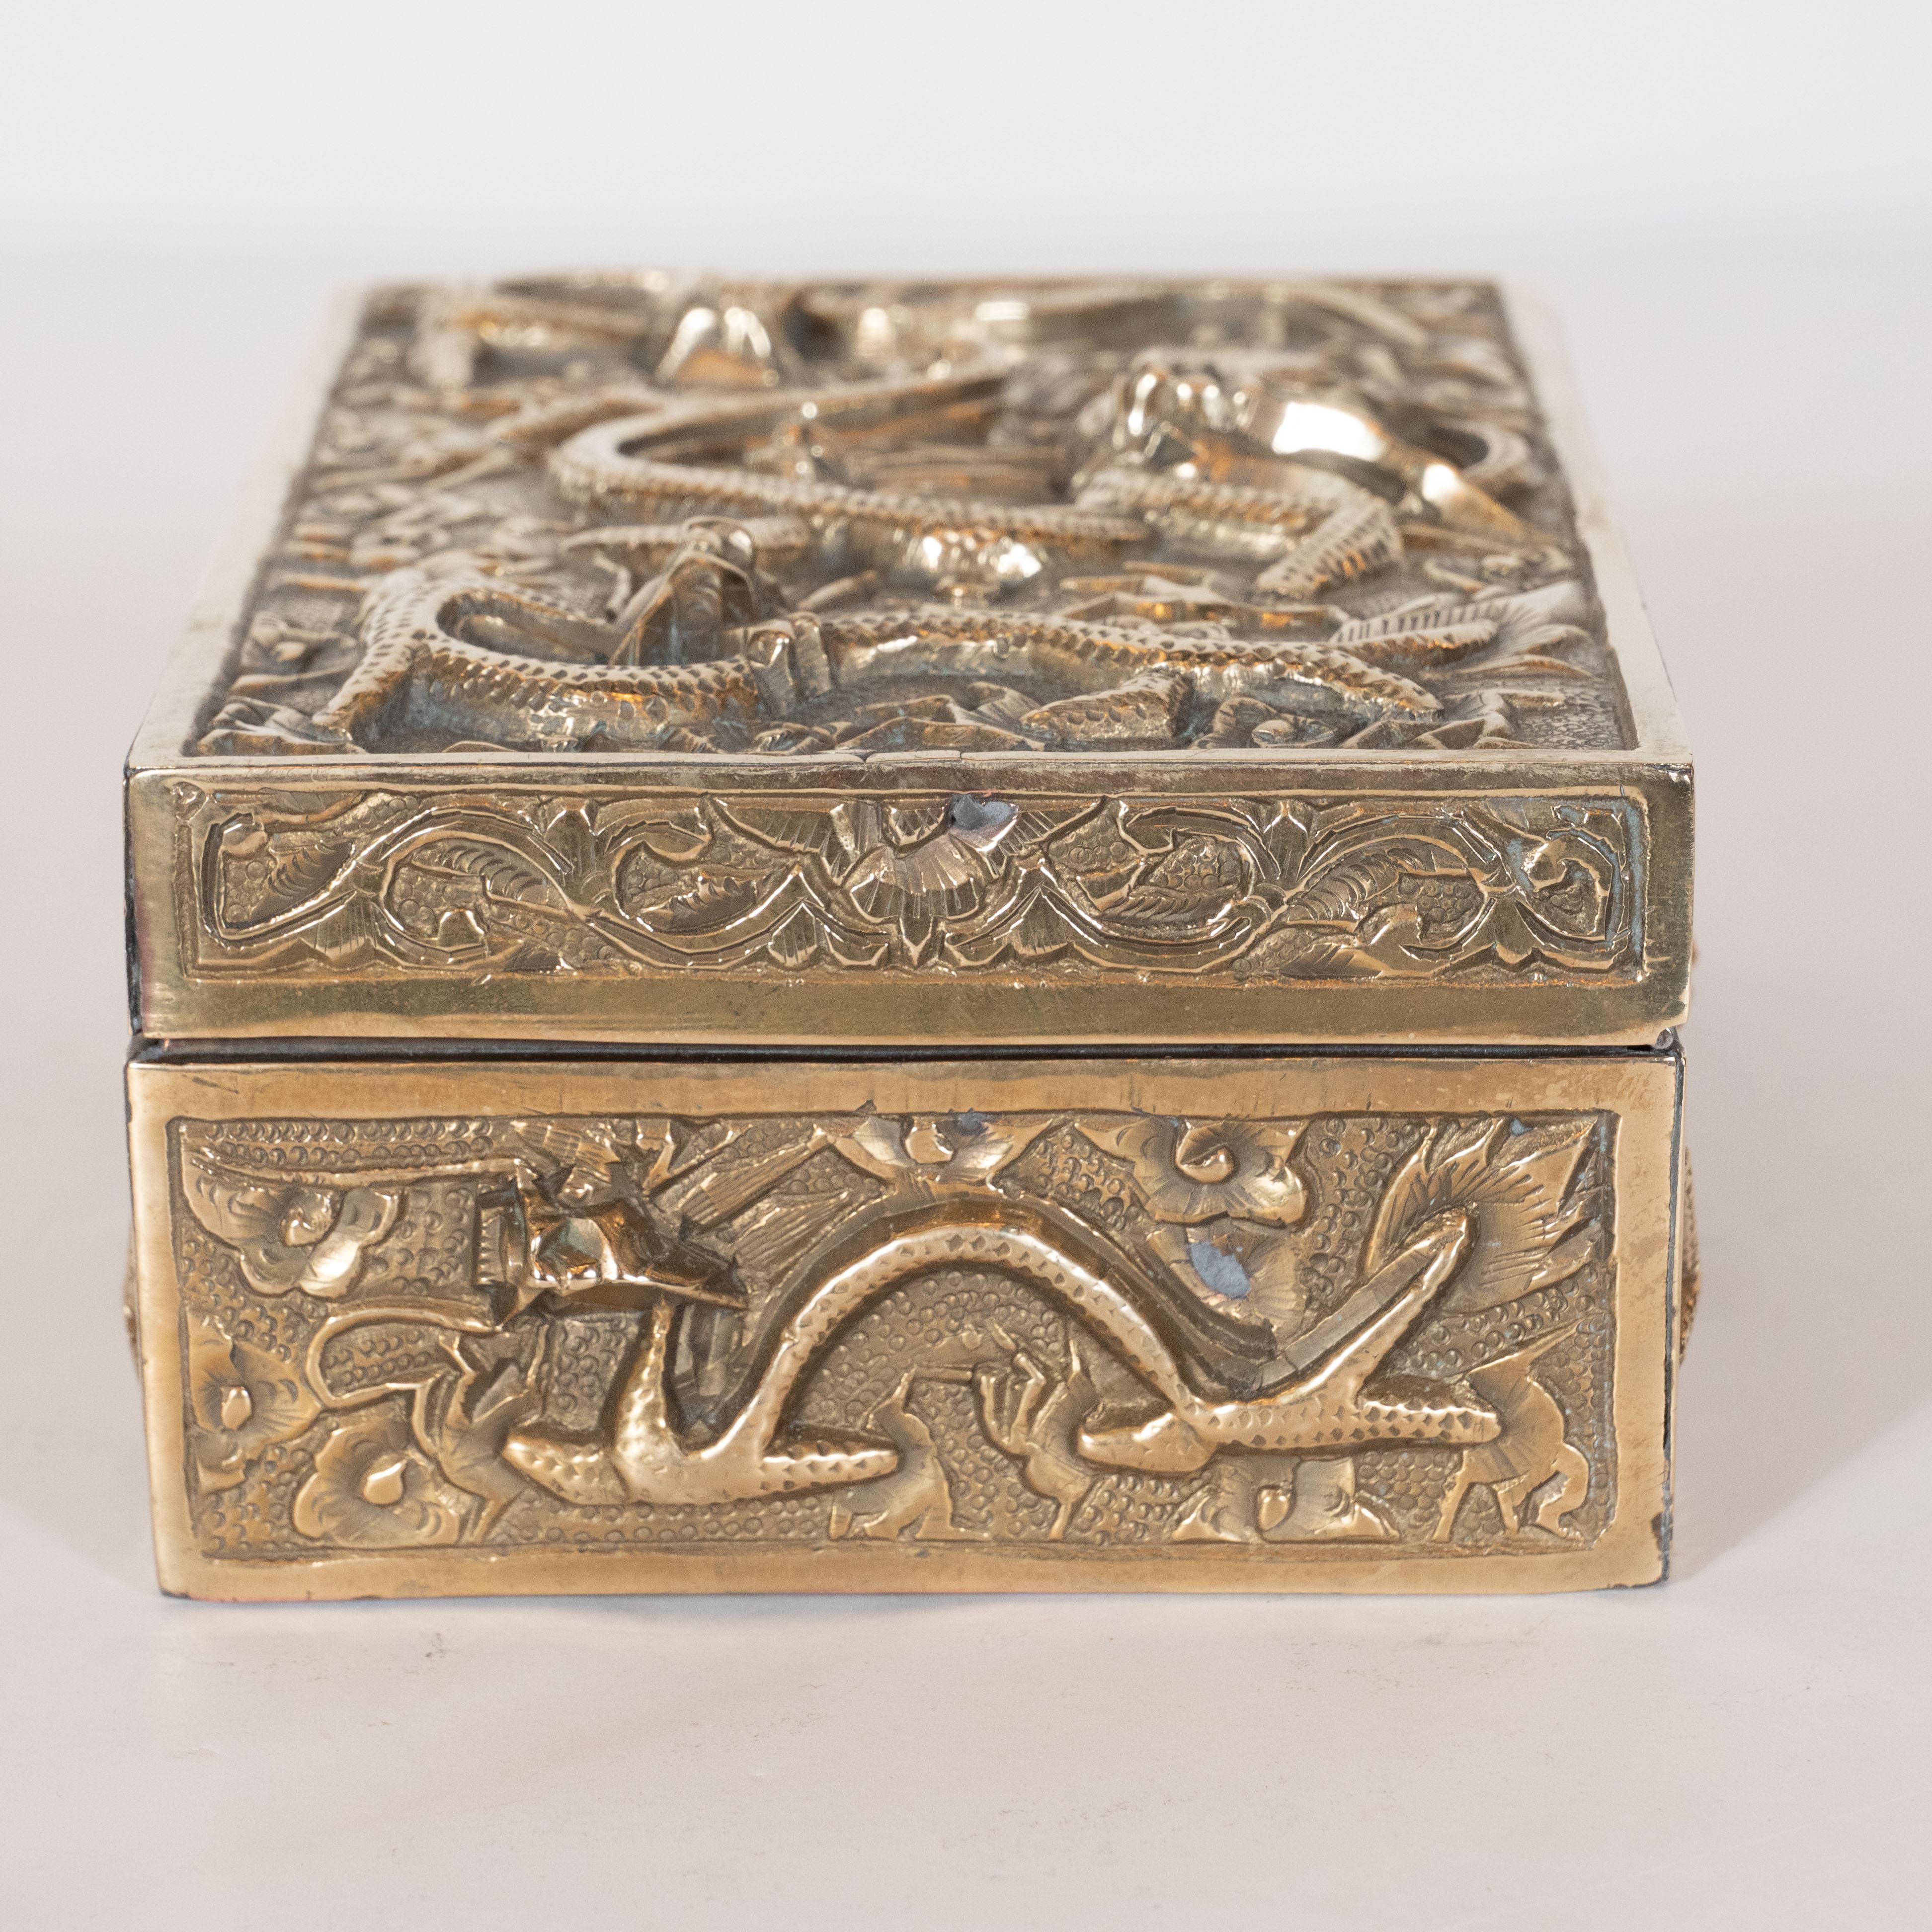 Art Deco Brass Rectangular Decorative Box with Dragon Motif in High Relief 6